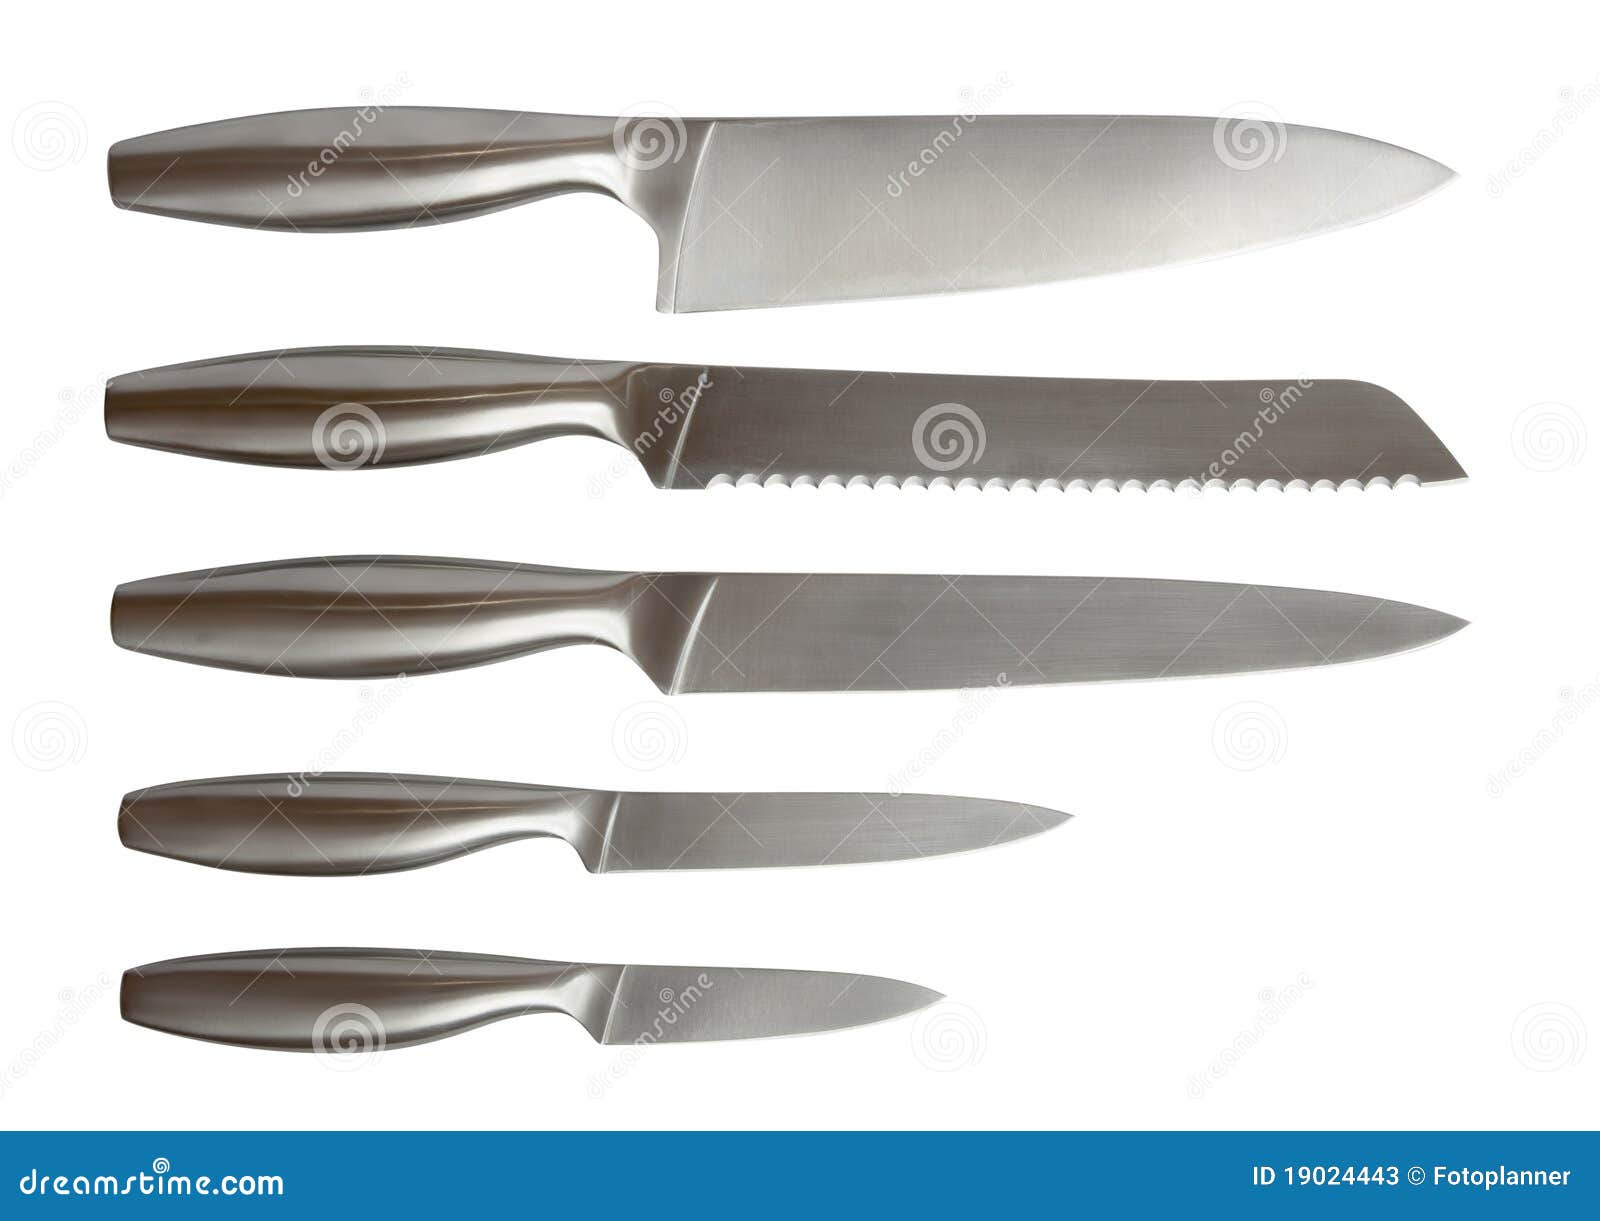 Exacto Knife With Clipping Path Stock Photo - Download Image Now